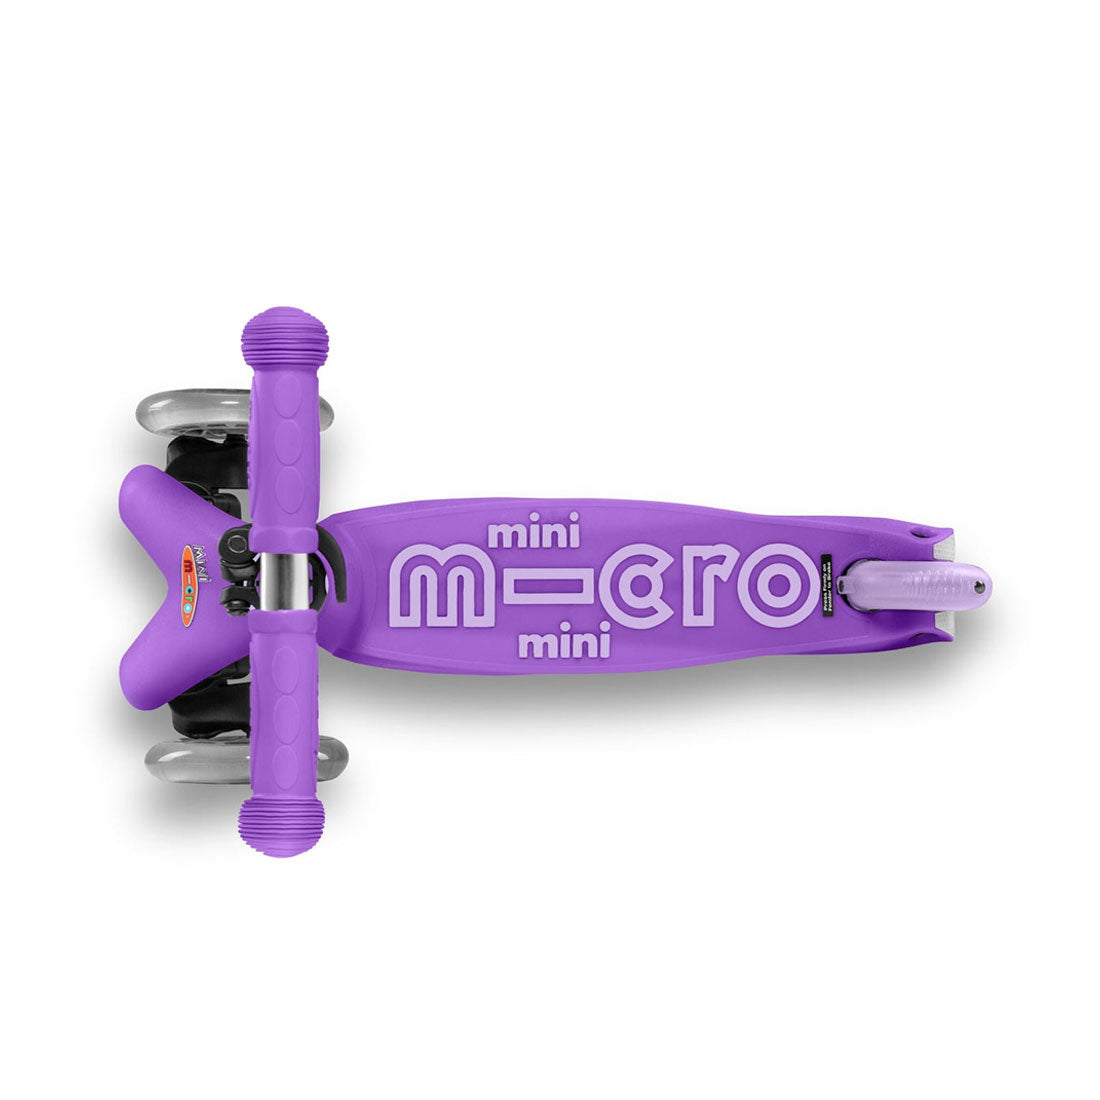 Micro Mini Deluxe Scooter - Purple Scooter Completes Rec